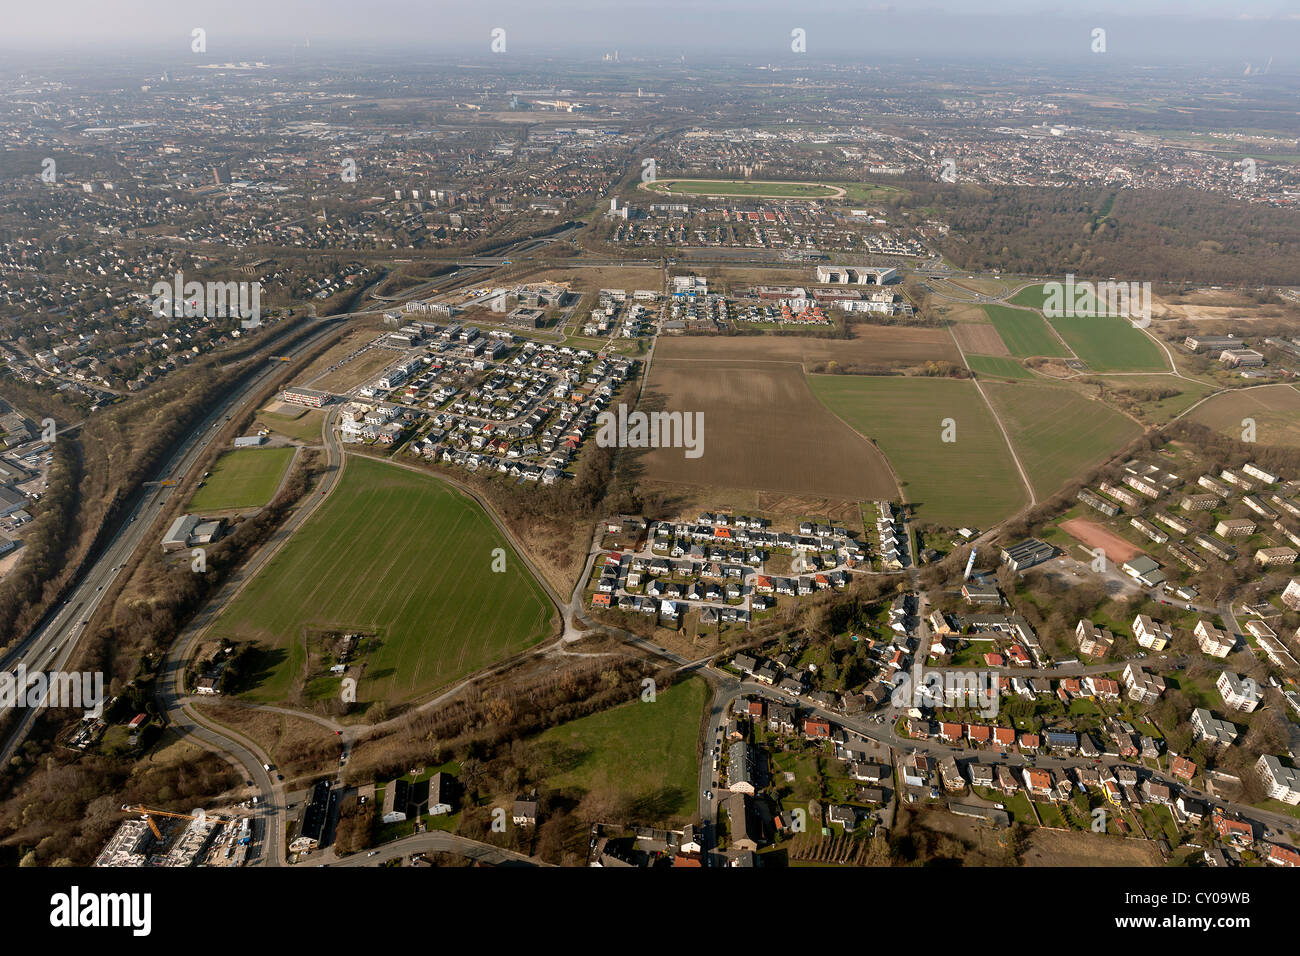 Aerial view, Stadtkrone Ost, B1, commercial area, residential area, development company, Dortmund, Ruhr area Stock Photo